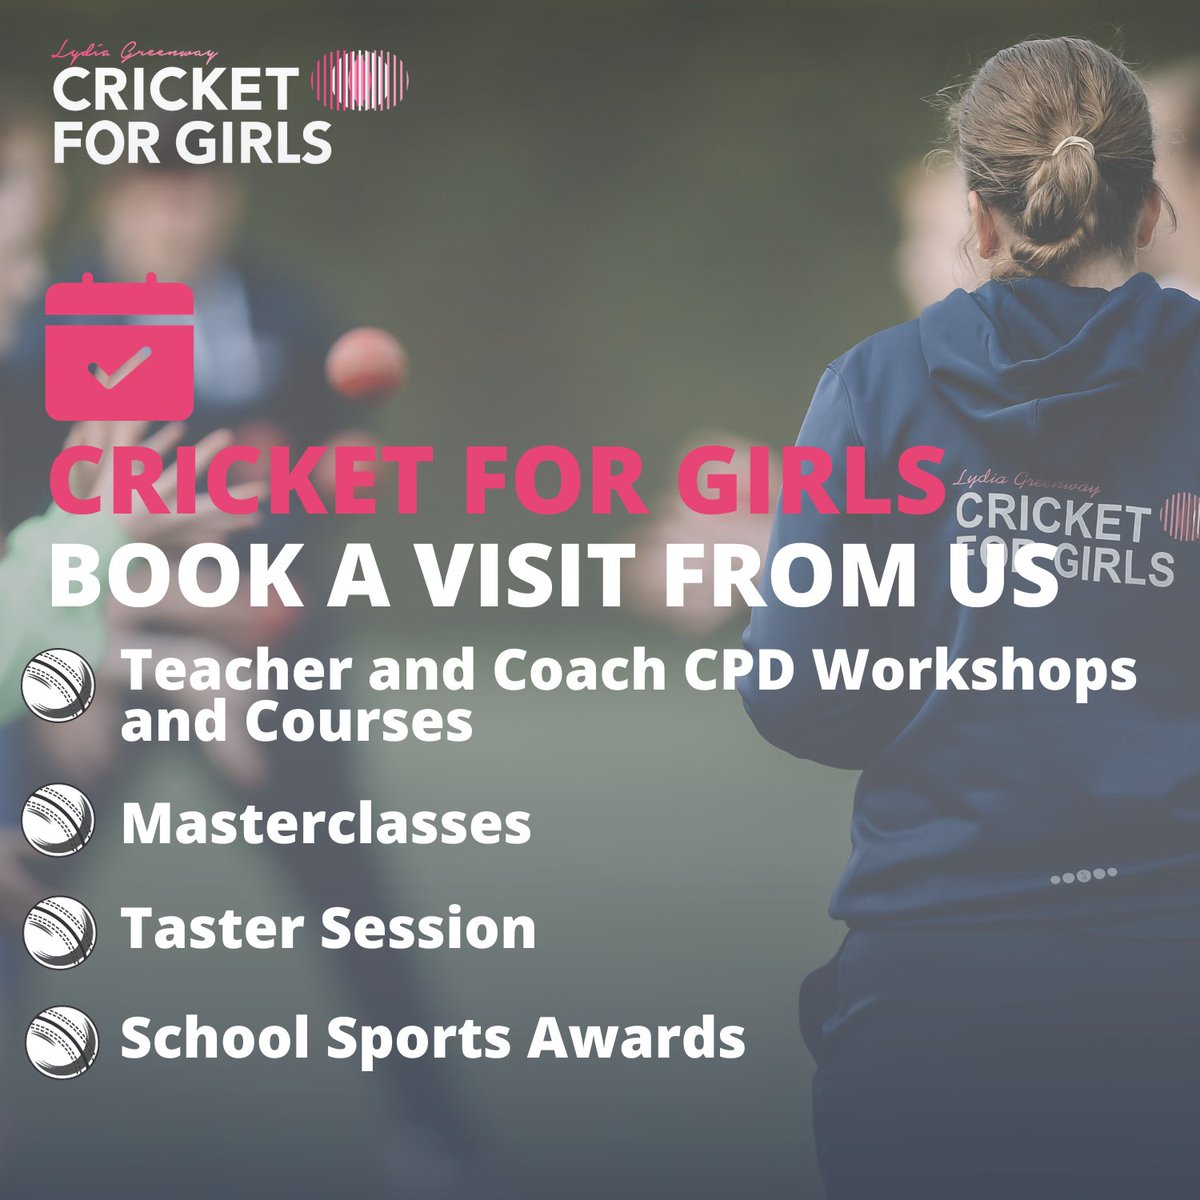 📆BOOK A VISIT FROM US 👉 Teacher and Coach CPD Workshops and Courses 👉 Masterclasses for aspiring cricketers 👉 Engaging Taster Sessions to ignite the cricketing passion 👉 School Sports Awards Presentations ✉️ Email us: events@cricketforgirls.com ow.ly/Xrnt50Q1OB1